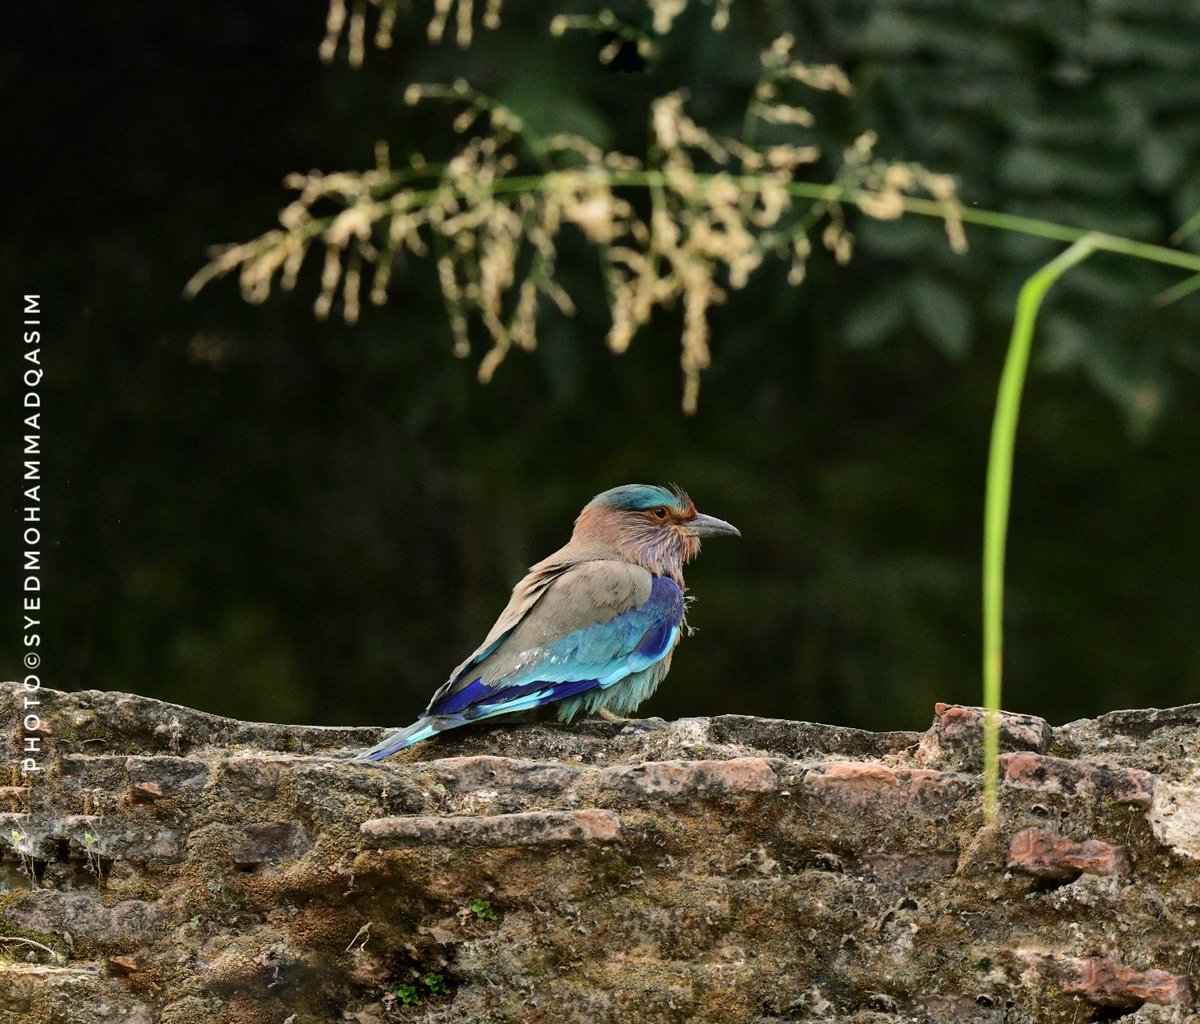 Saw brilliant blue bird of Lord Shiva, #Neelkanth , #IndianRoller near a Bargad tree.As per Ramayana traditions Sri Ram had killed Ravana after seeing Neelkanth.It is believed that sighting of this sacred bird on the day of Dussehra brings good luck